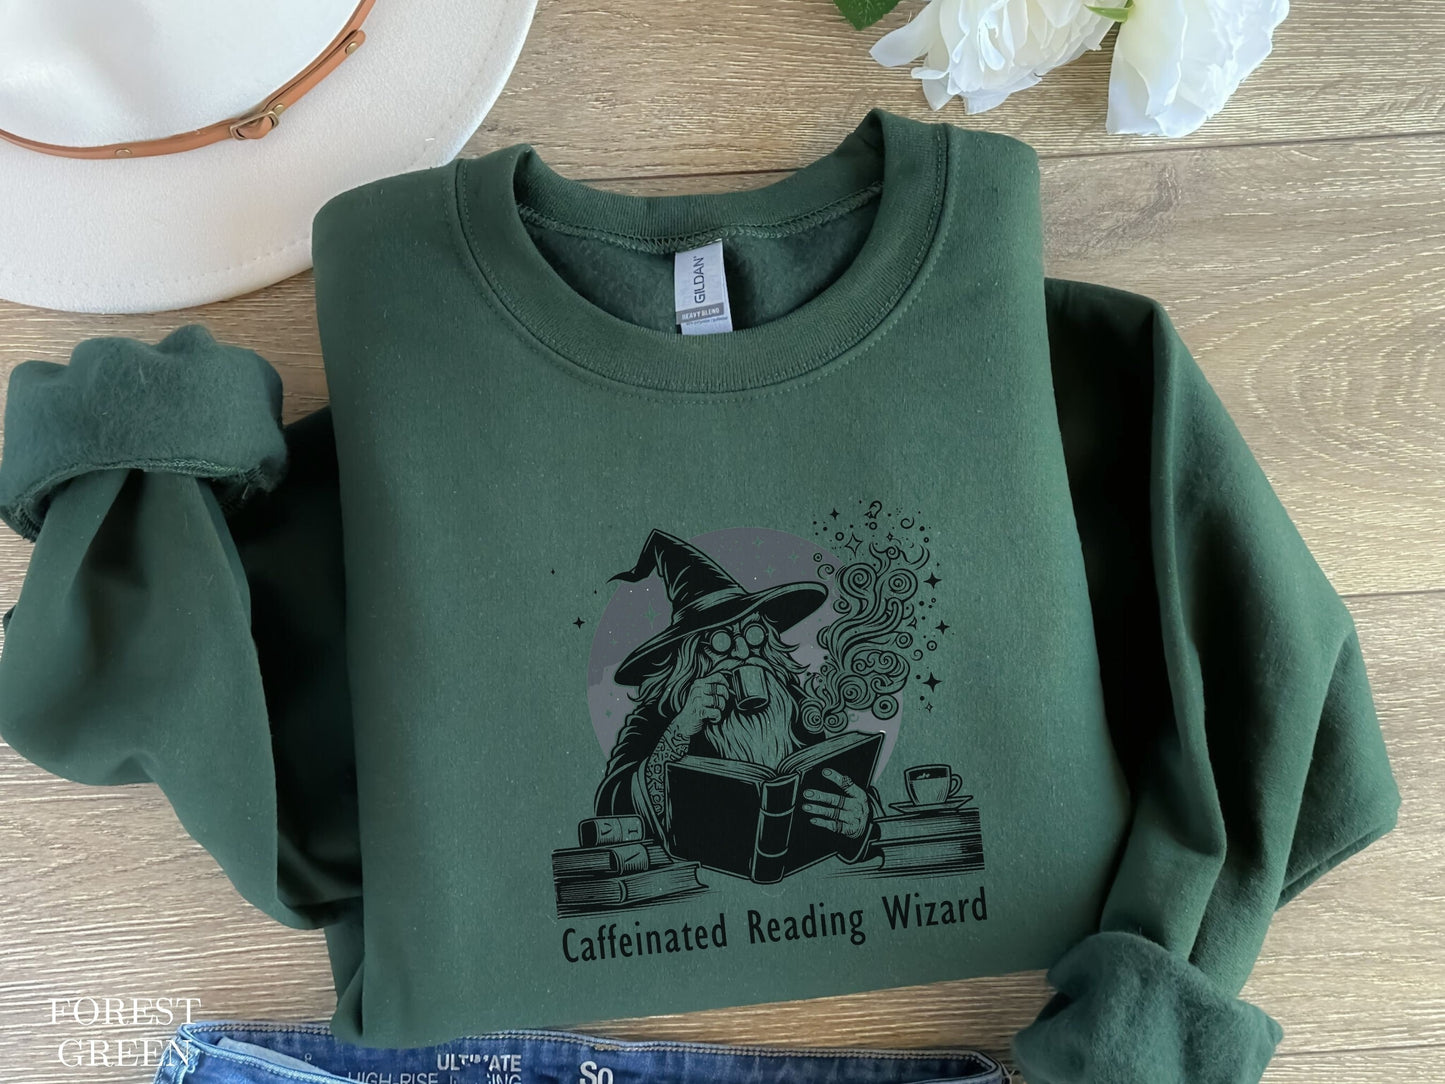 Magical Coffee Wizard Sweatshirt - Ideal Gift for Book and Coffee Fans